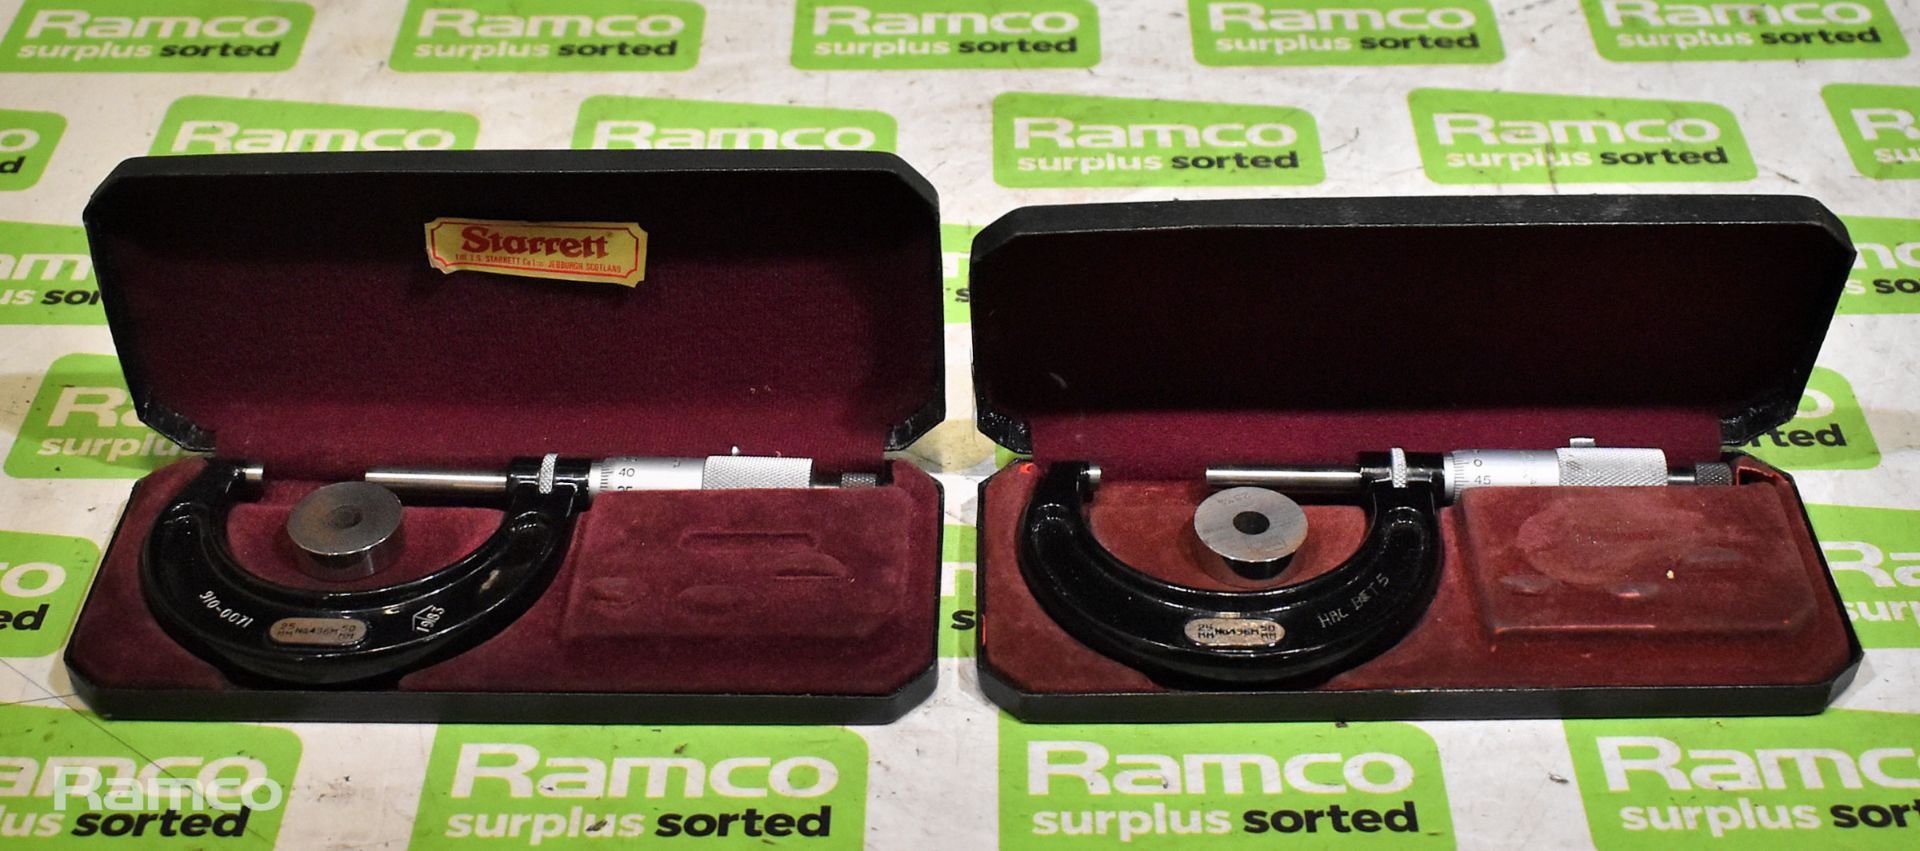 2x Starrett No 436 25-50mm micrometer calipers with case (incomplete)